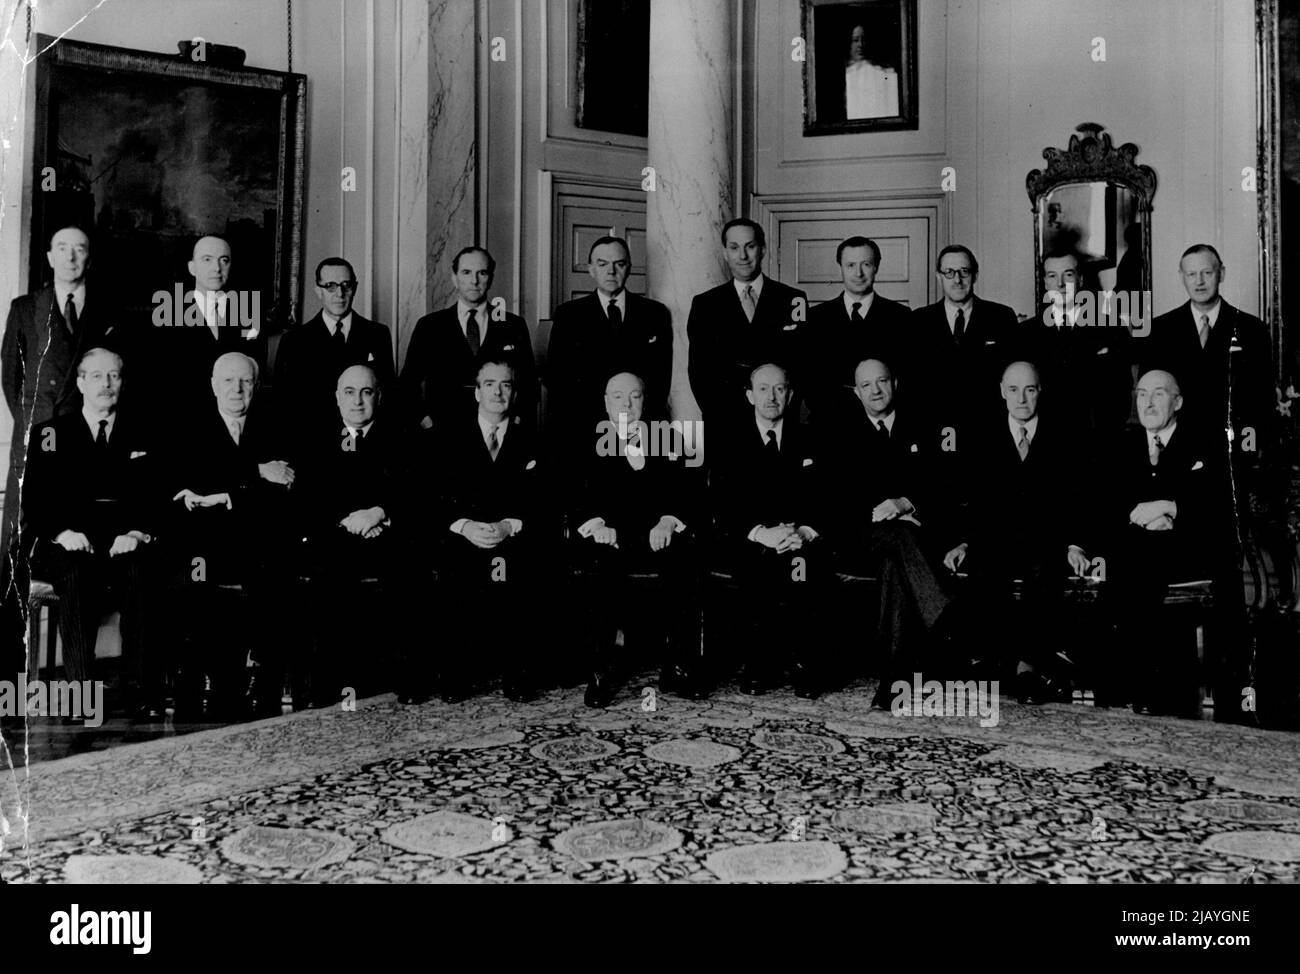 Sir Winston with his Cabinet -- (Left to right - Back row) Mr.Osbert Peake, Mr.Peter Thorneycroft, Sir Walter Monkton, Mr.Stuart, Mr.Lloyd George, Mr.Lennox-Boyd, Mr.Duncan Sandys, Sir Norman Brook (Secretary to the Cabinet), (front row) Mr. MacMillan, Lord Woolton, Lord Kilmuir, Sir Anthony Eden, Sir Winston Churchill, Lord Salisbury, Mr. Butler, Lord Swinton and Mr. Crookshank. Sir Winston Churchill Photographed at No.10. Downing street after this morning's Cabinet Meeting. April 05, 1955. (Photo by Paul Popper, Paul Popper Ltd.). Stock Photo